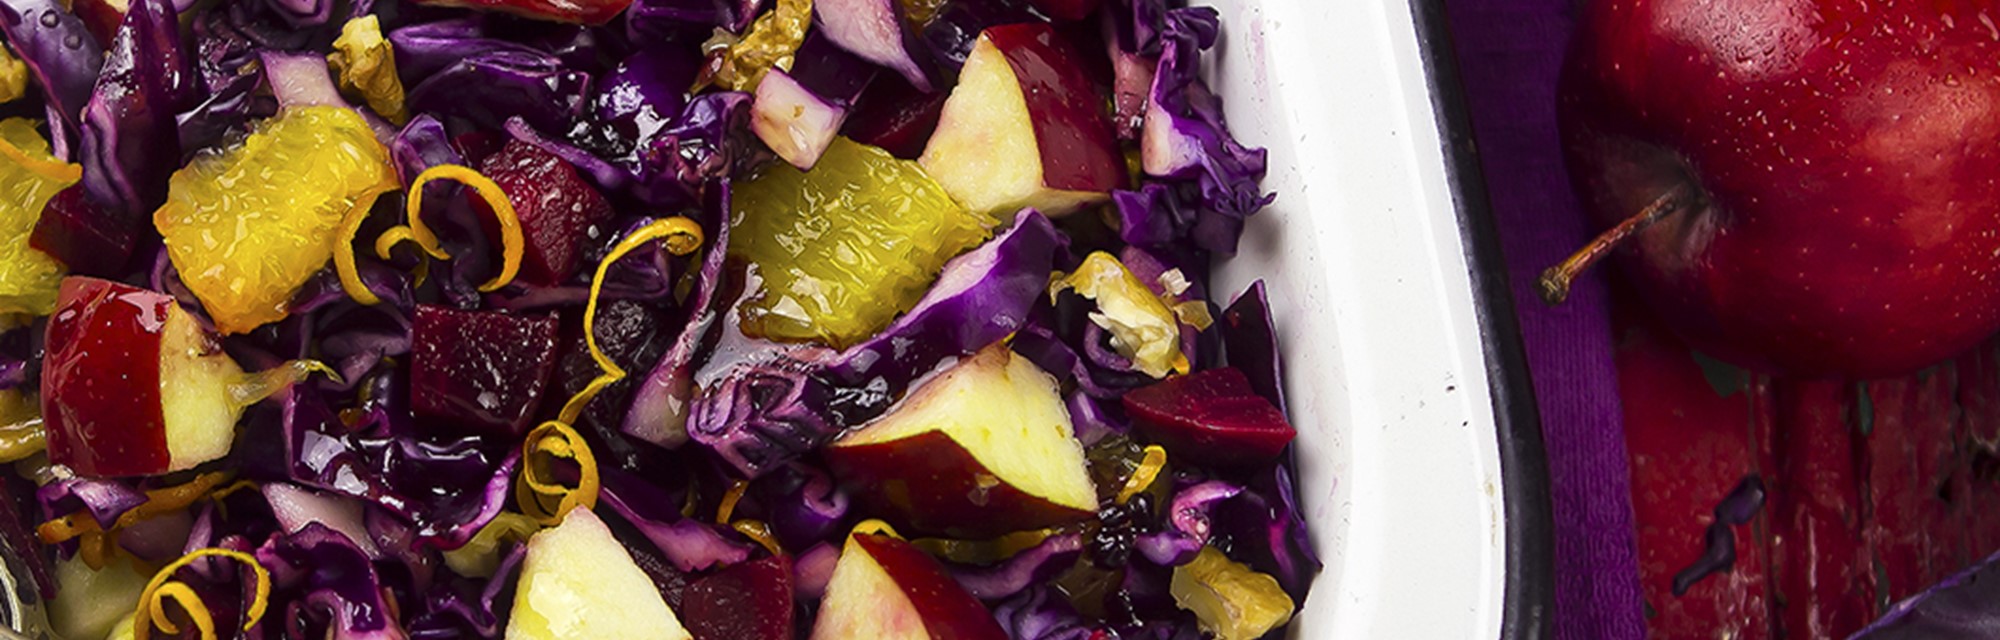 Festive red cabbage